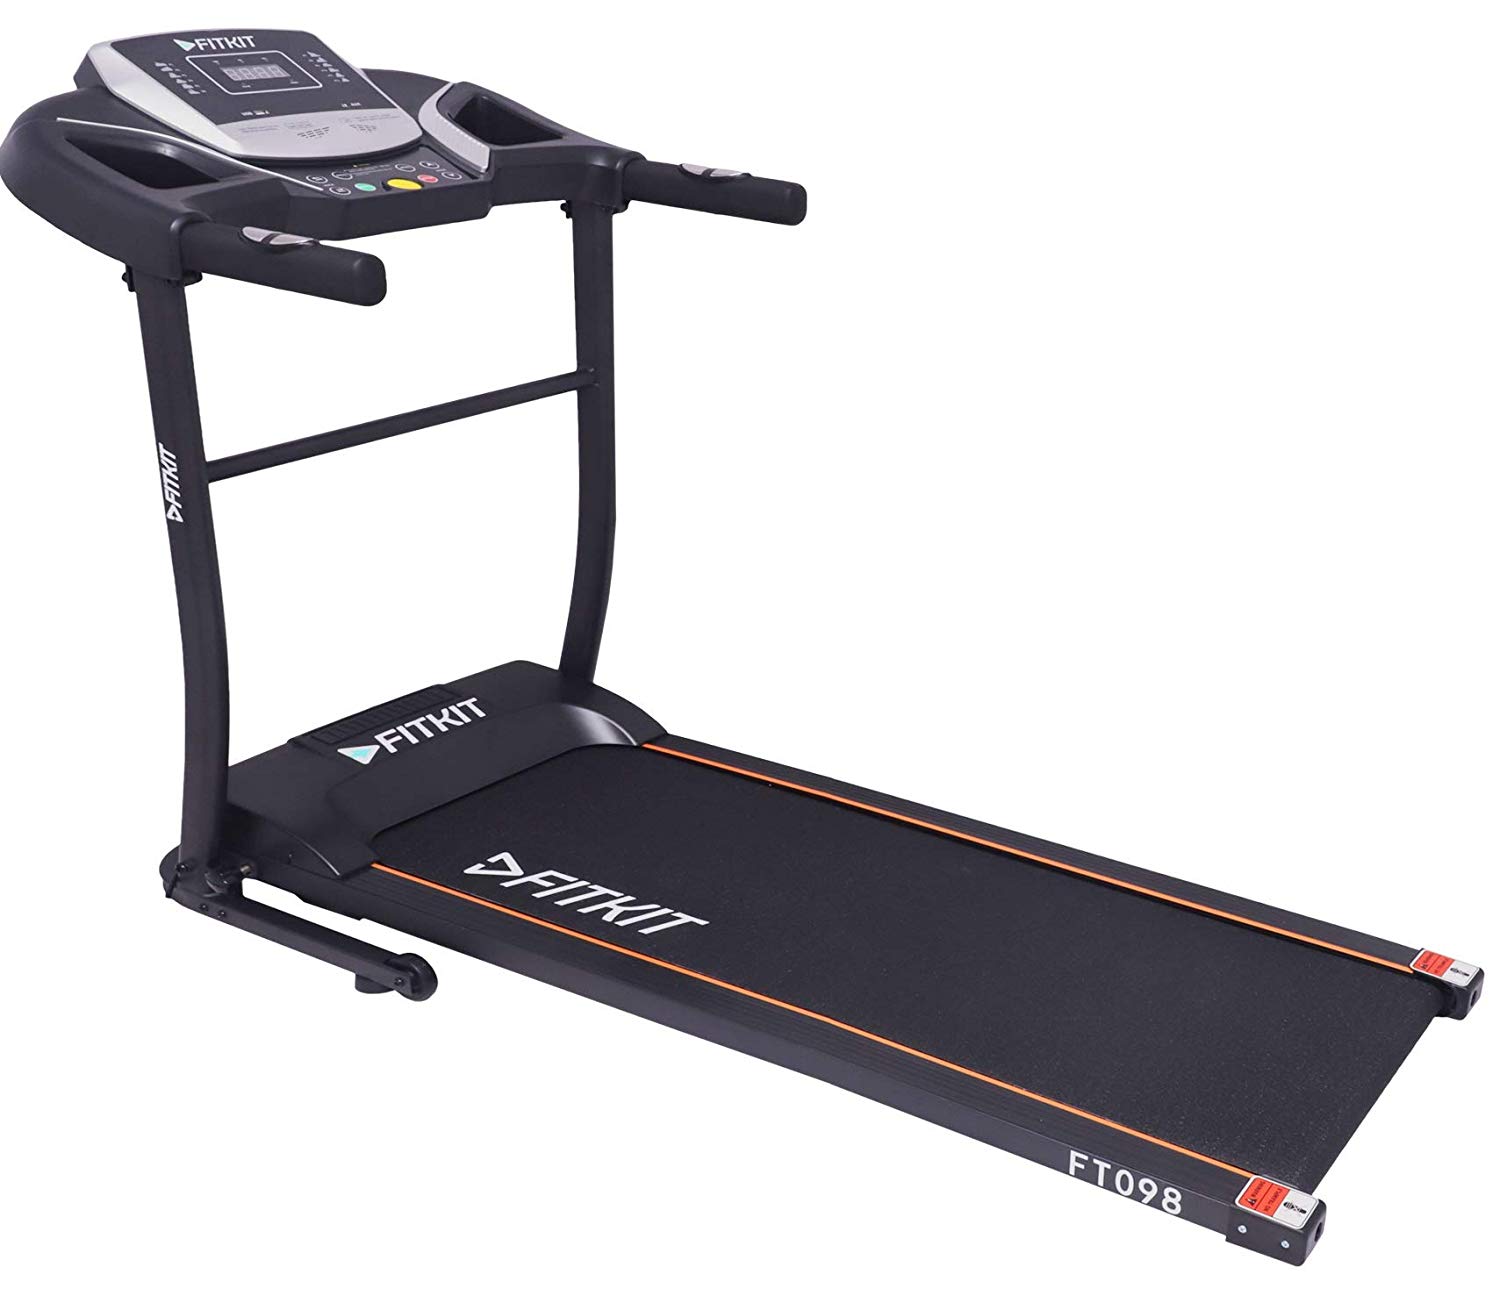 Fitkit FT098 Series is the best affordable motorized treadmill in India for tall people